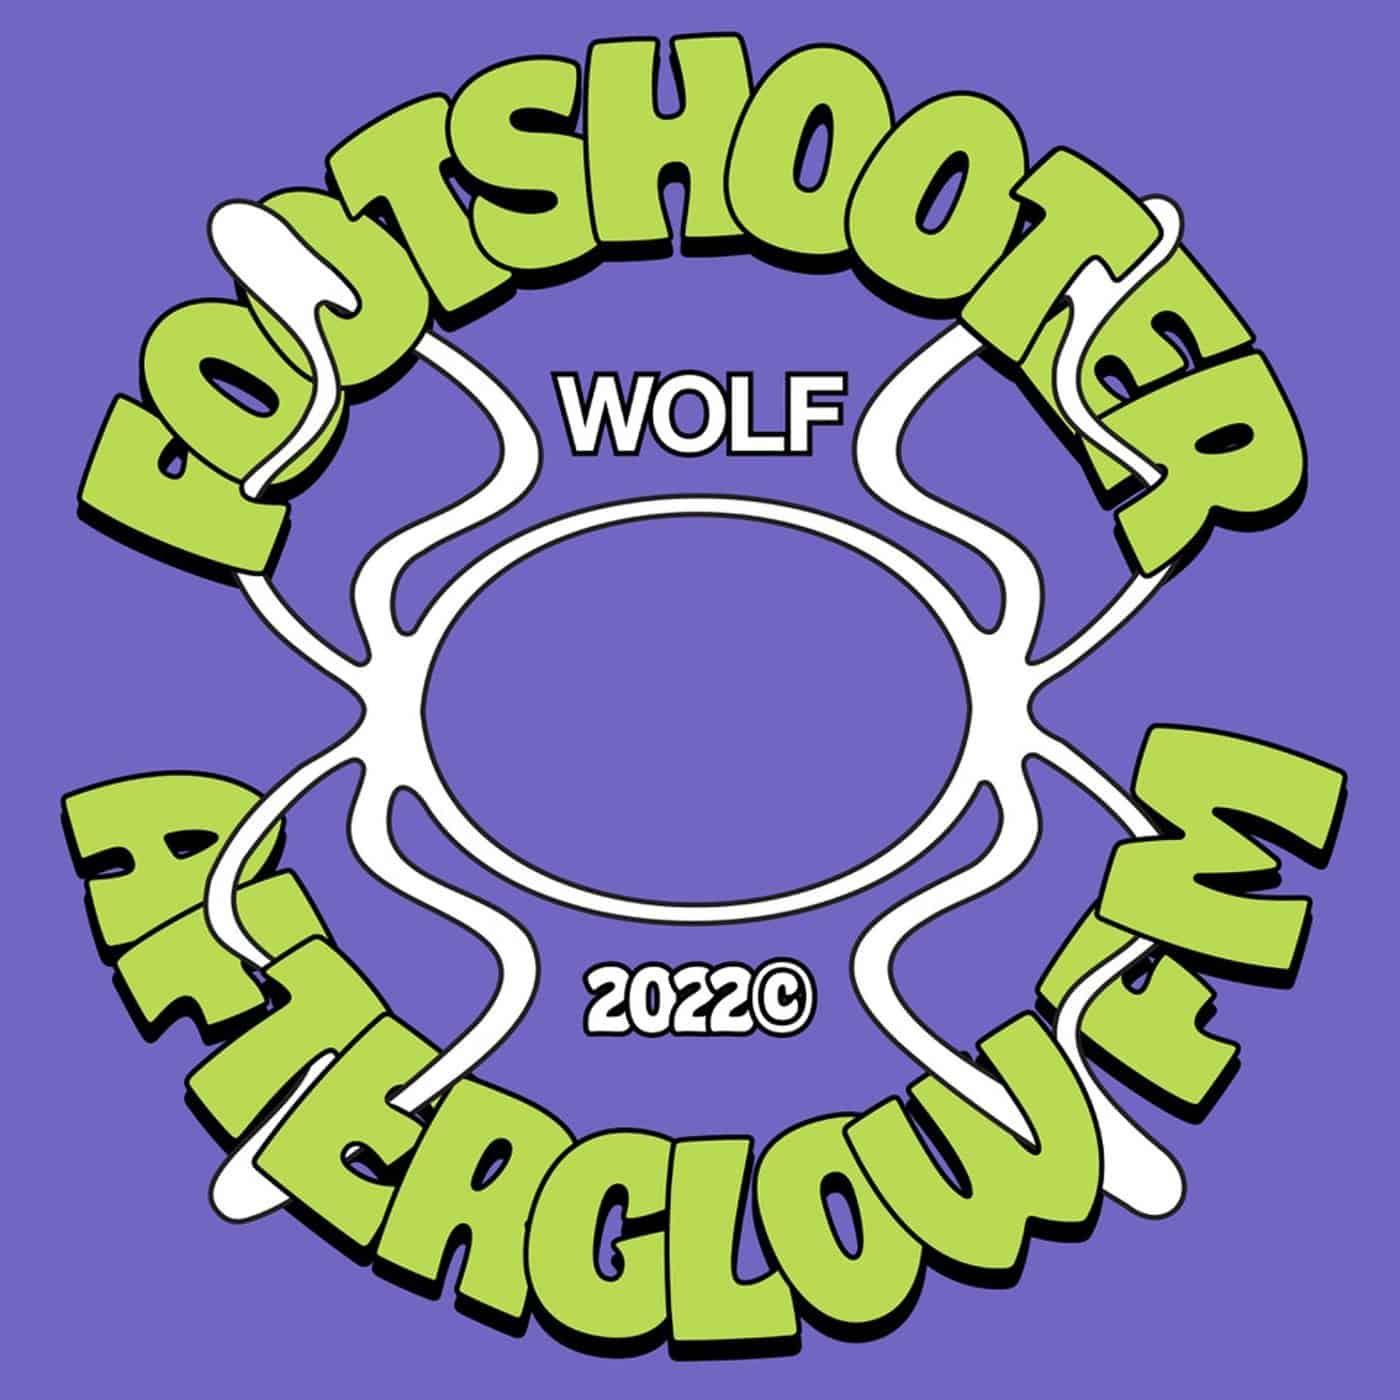 Download Footshooter - Afterglow FM on Electrobuzz